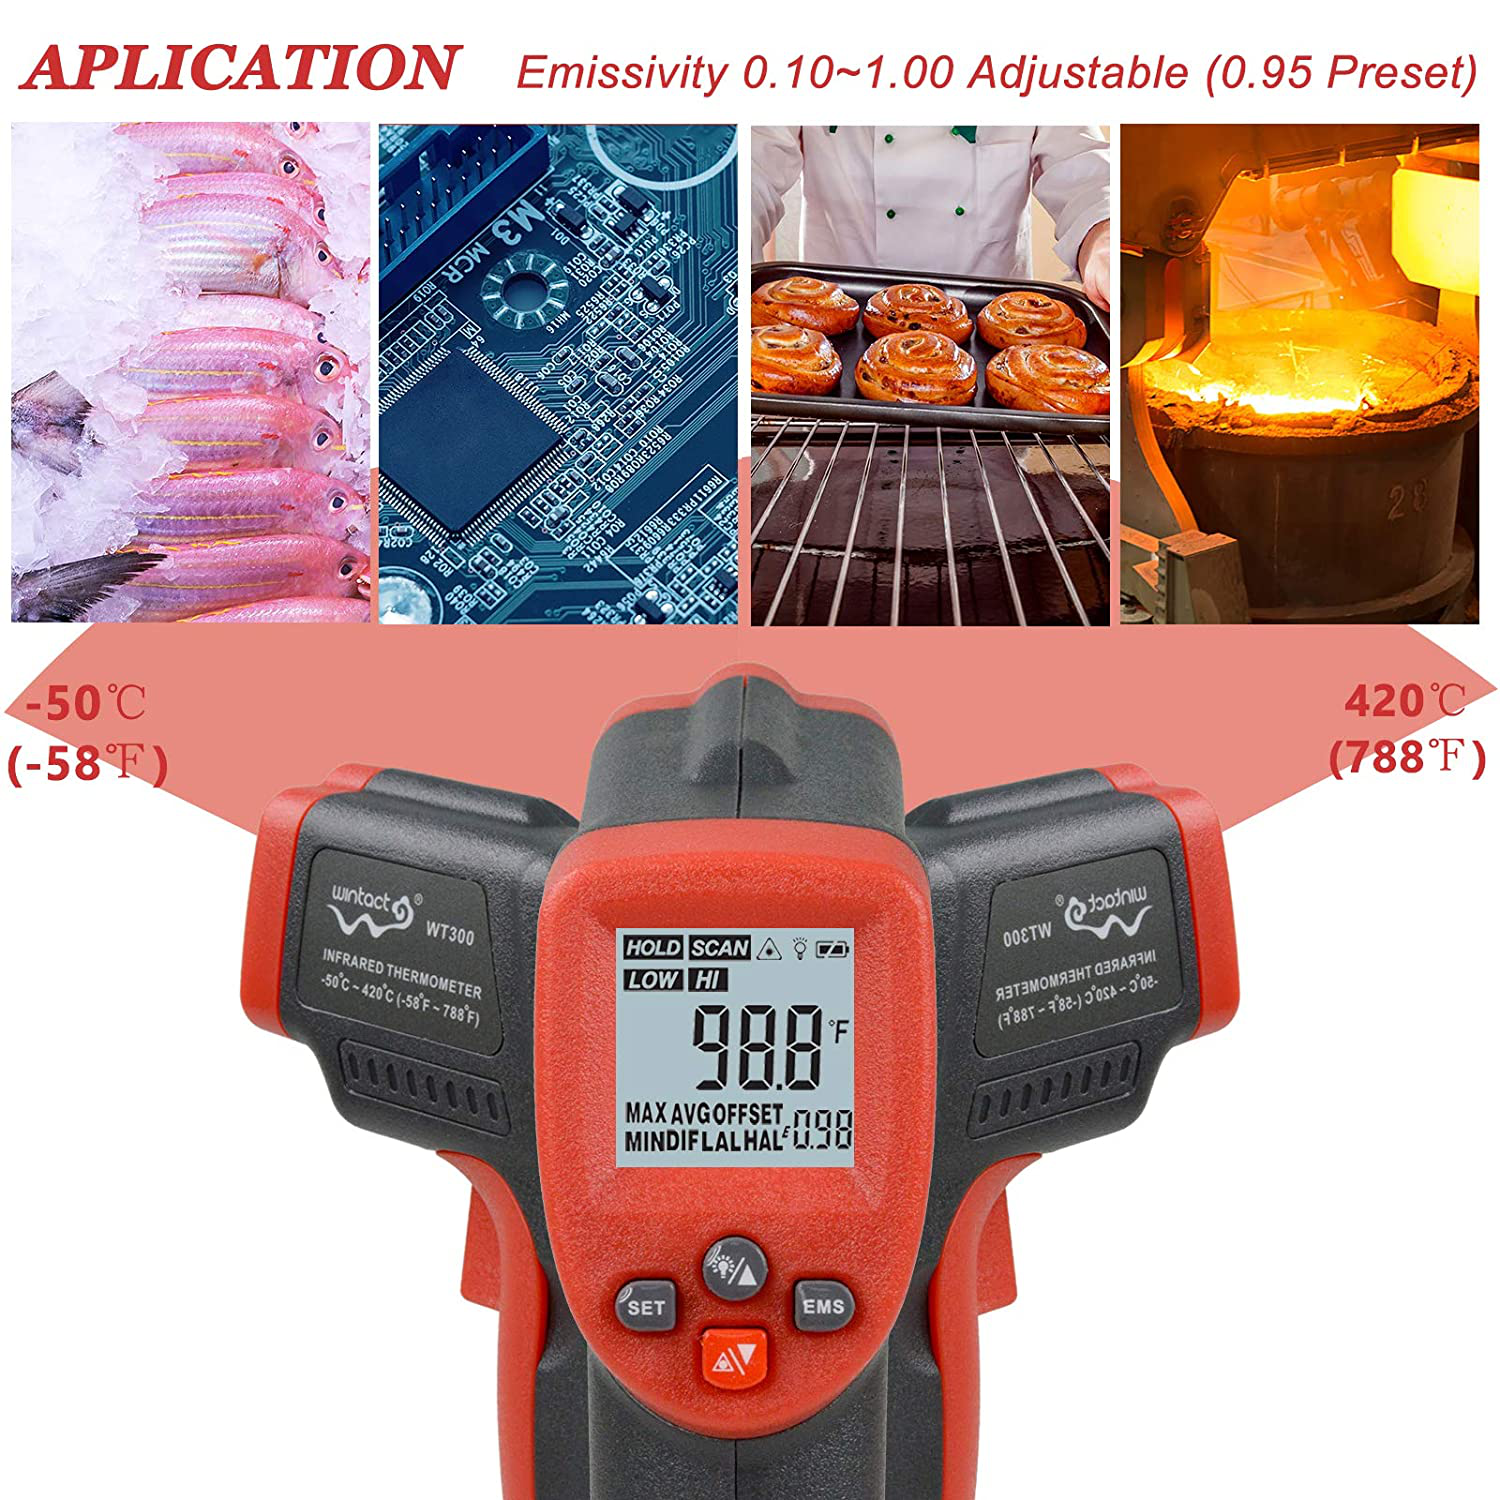 Infrared Temp Thermometer for Cooking -58~788℉(-50~420℃) with High and Low Temperature Alarm & Adjustable Emissivity MAX MIN DIF AVG, IR Laser Temperature Gun Not for Human